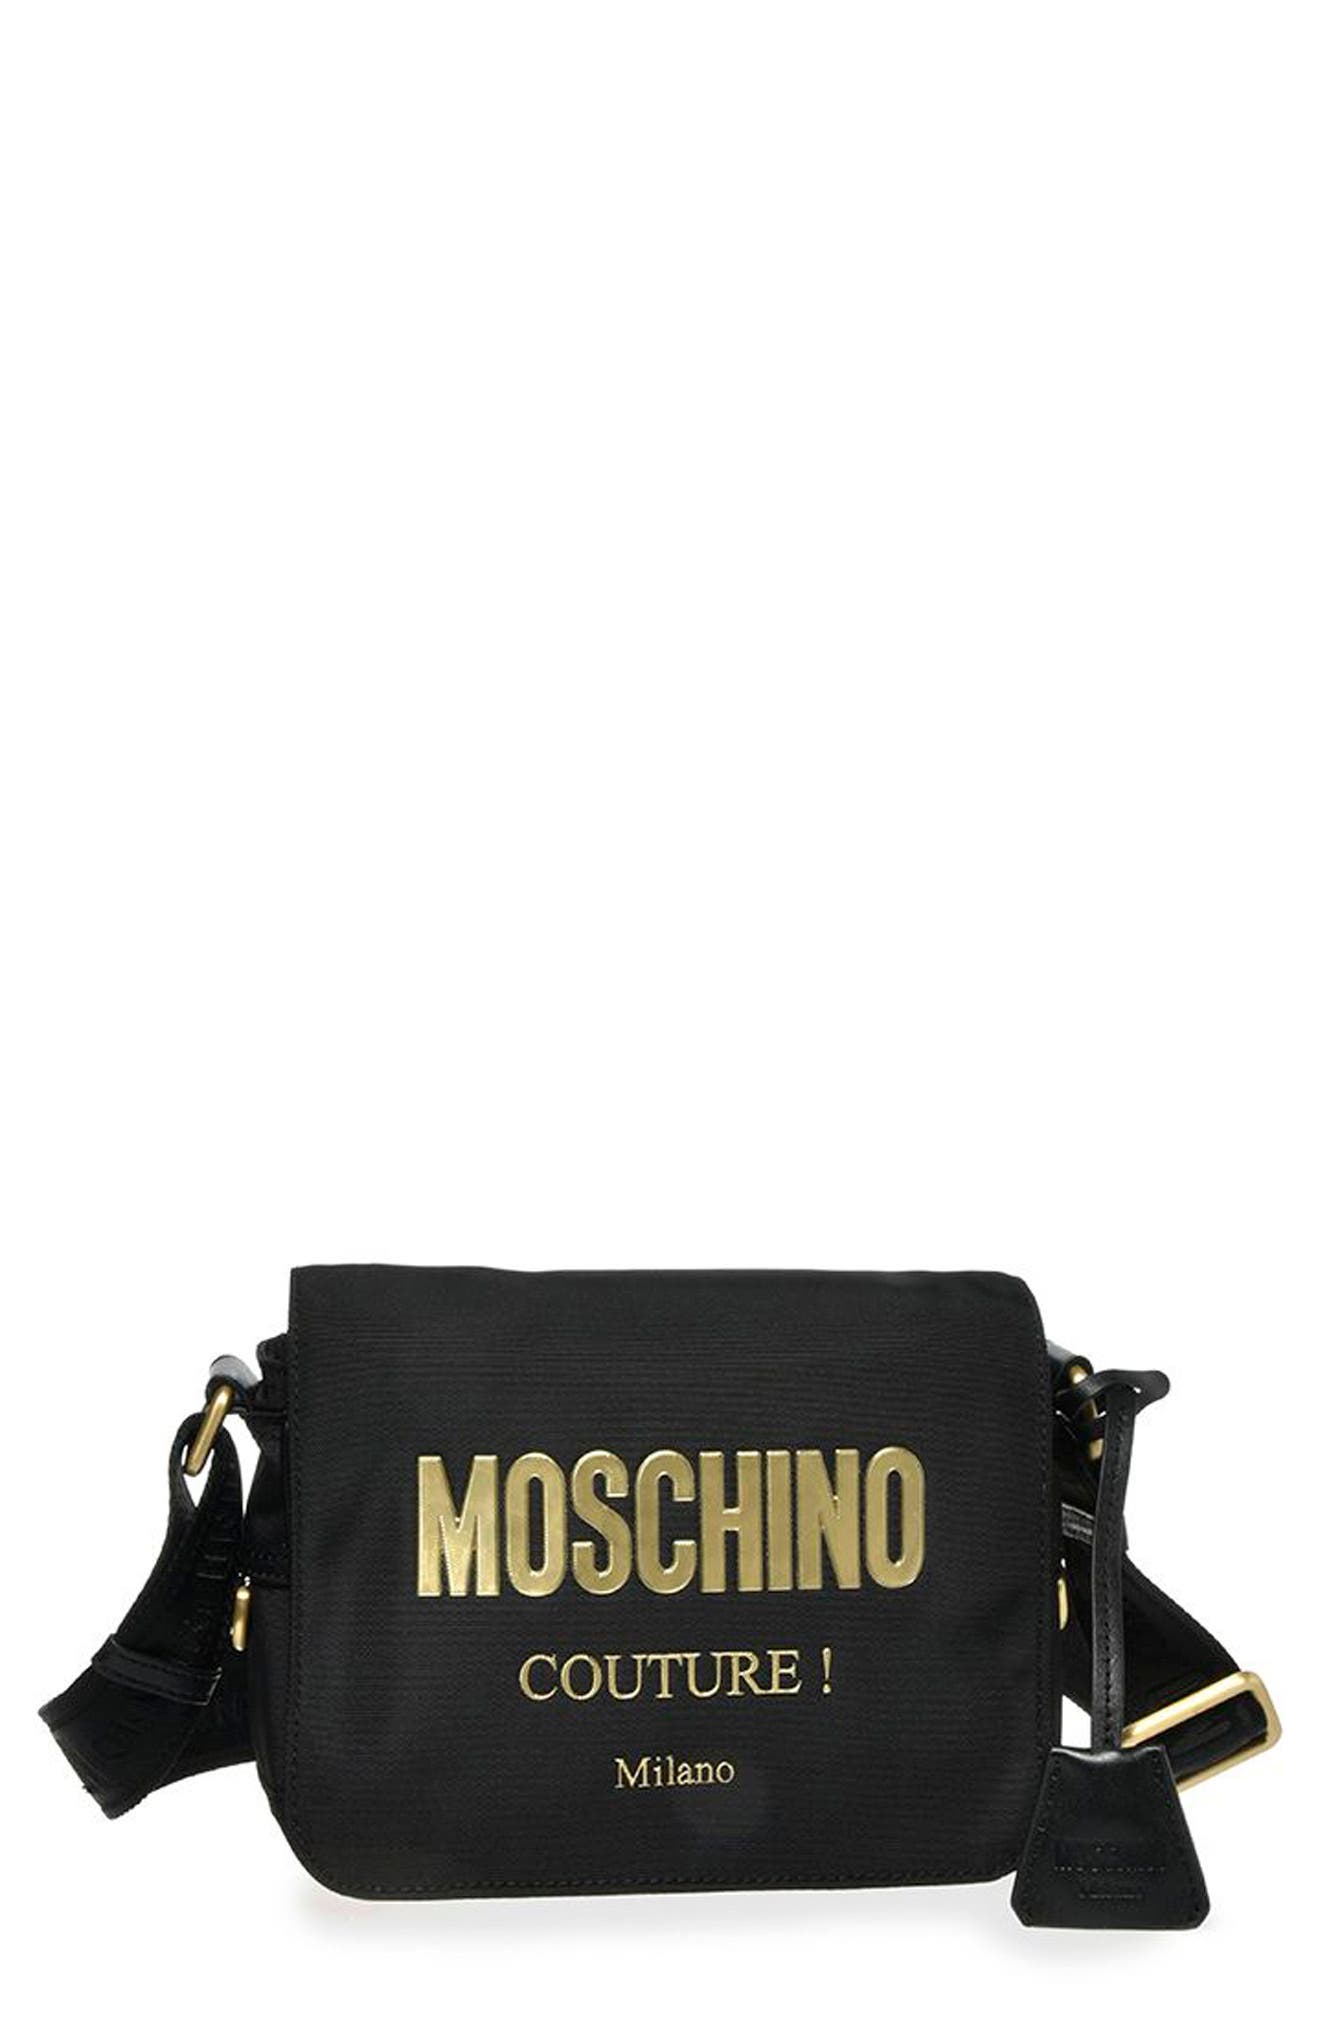 moschino shoes nordstrom